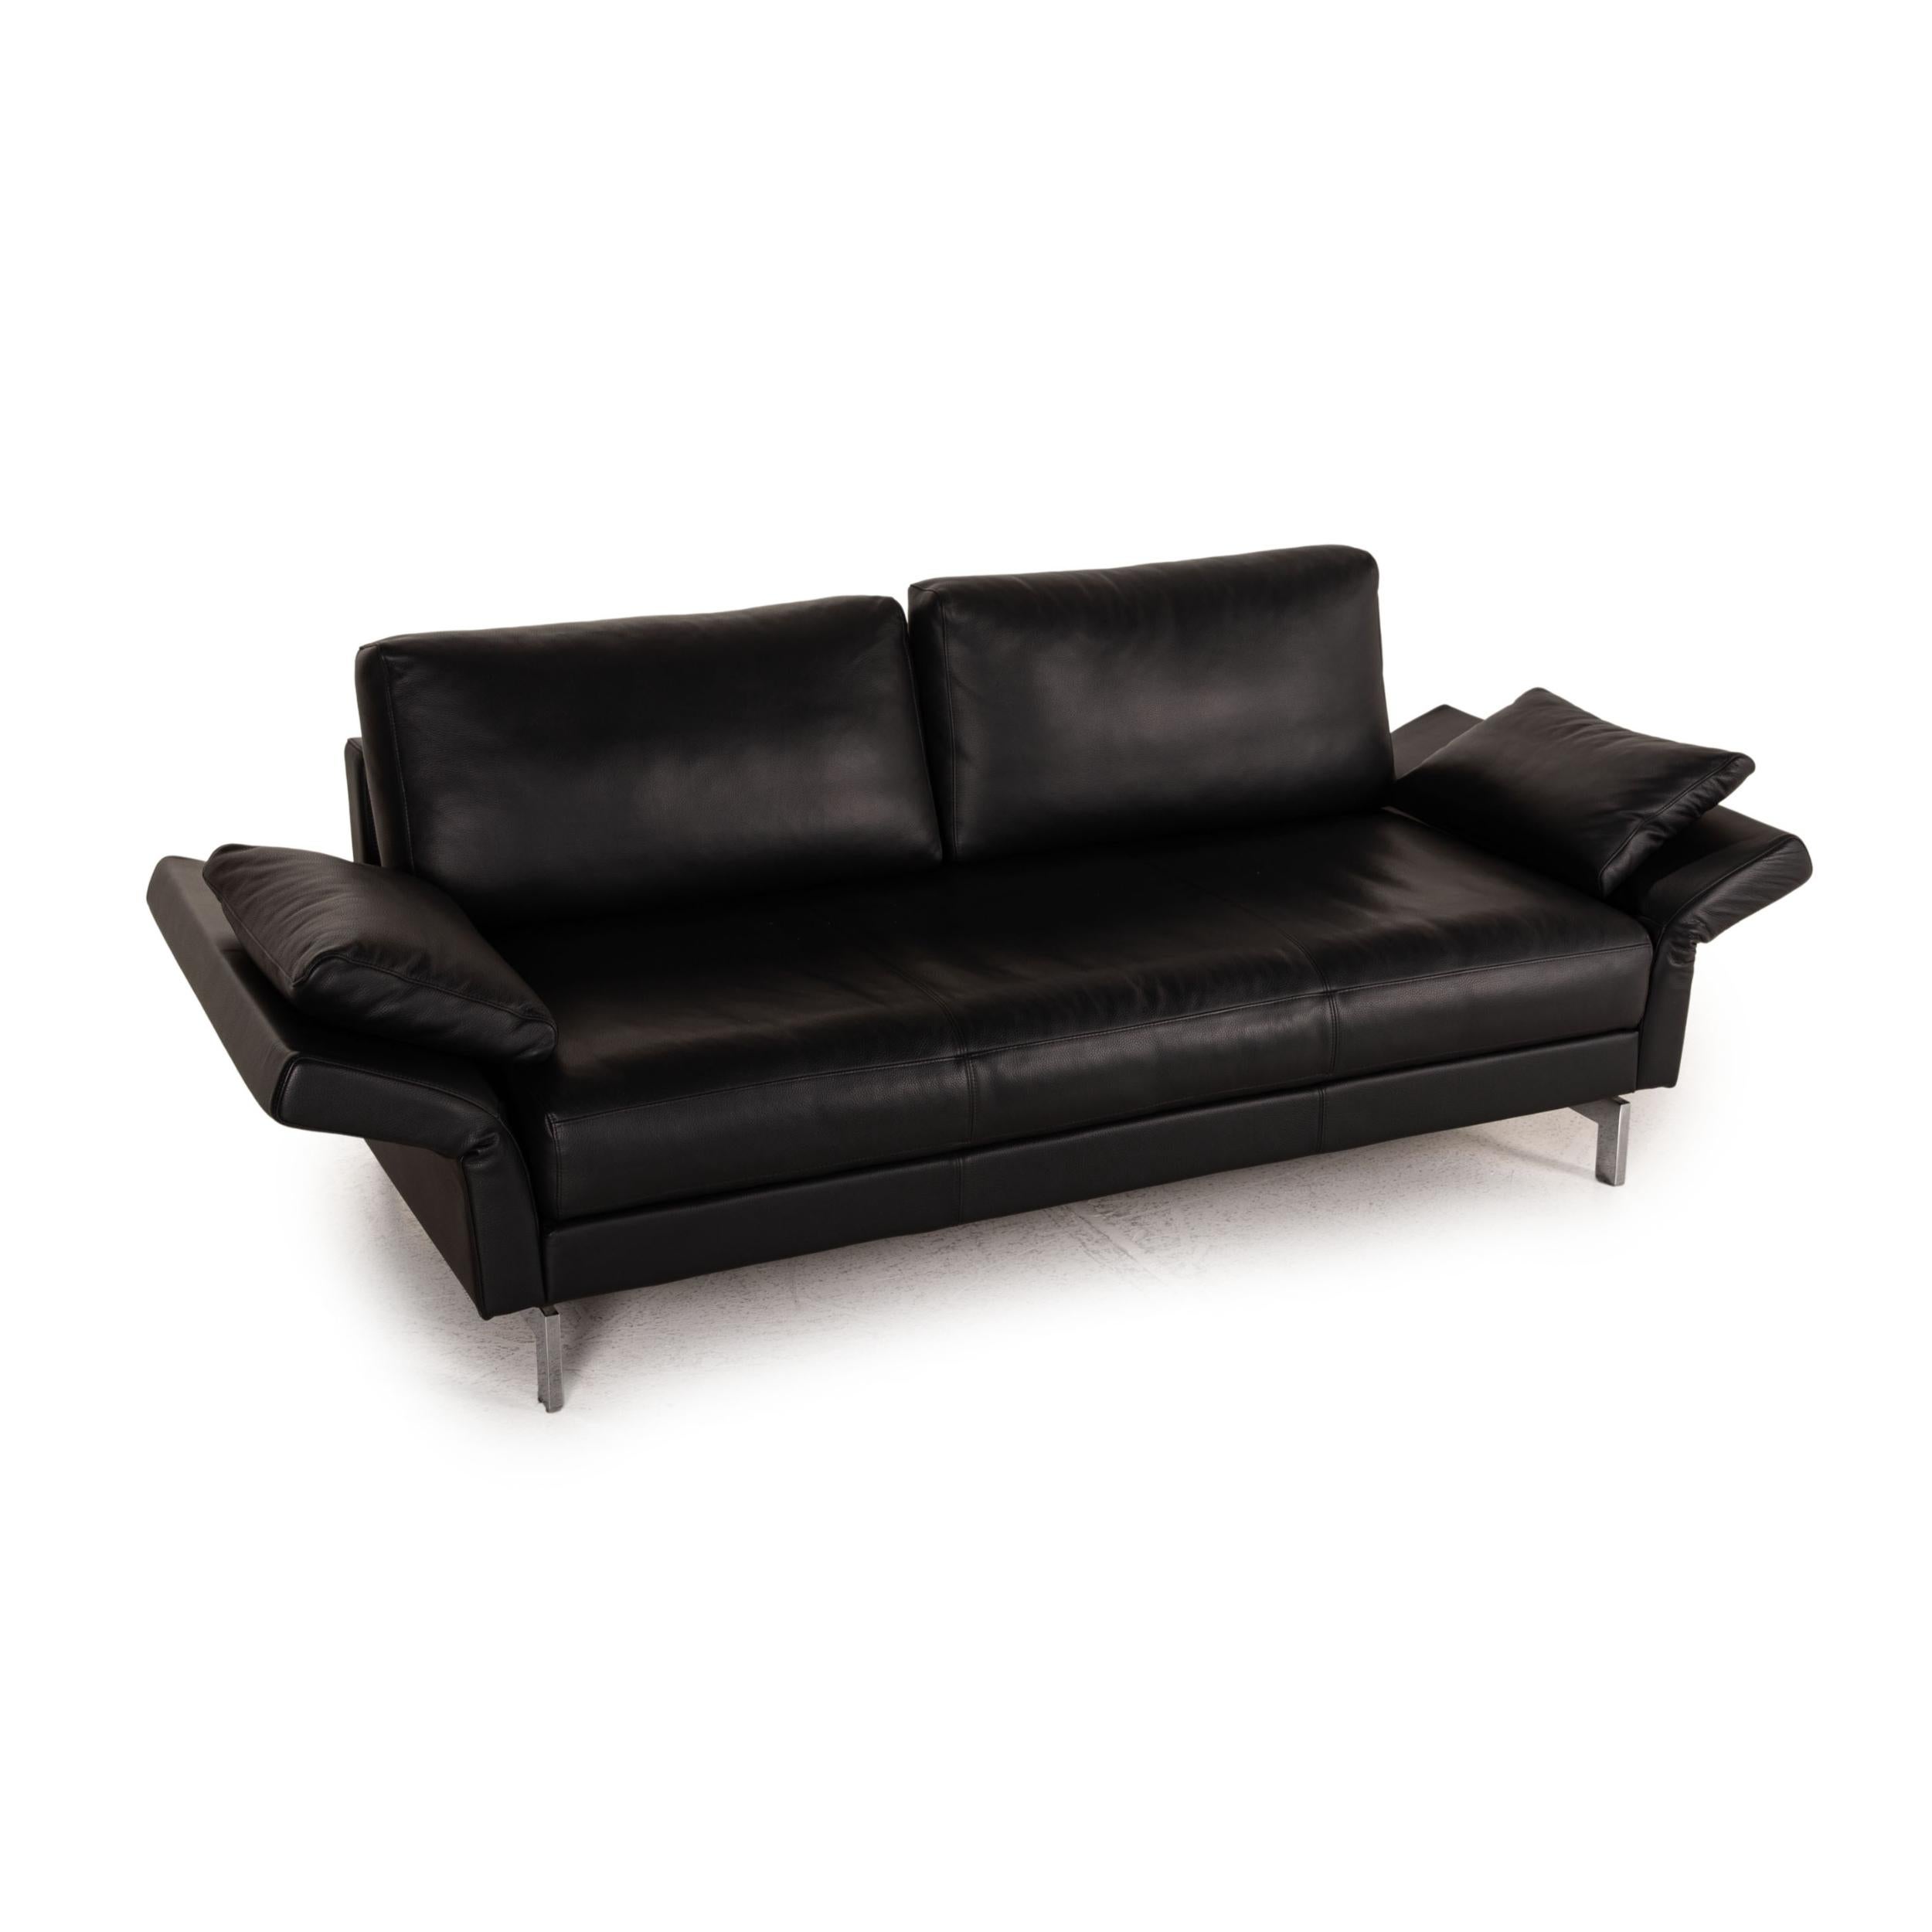 Modern Rolf Benz Vida Leather Sofa Black Three-Seater Couch Function For Sale